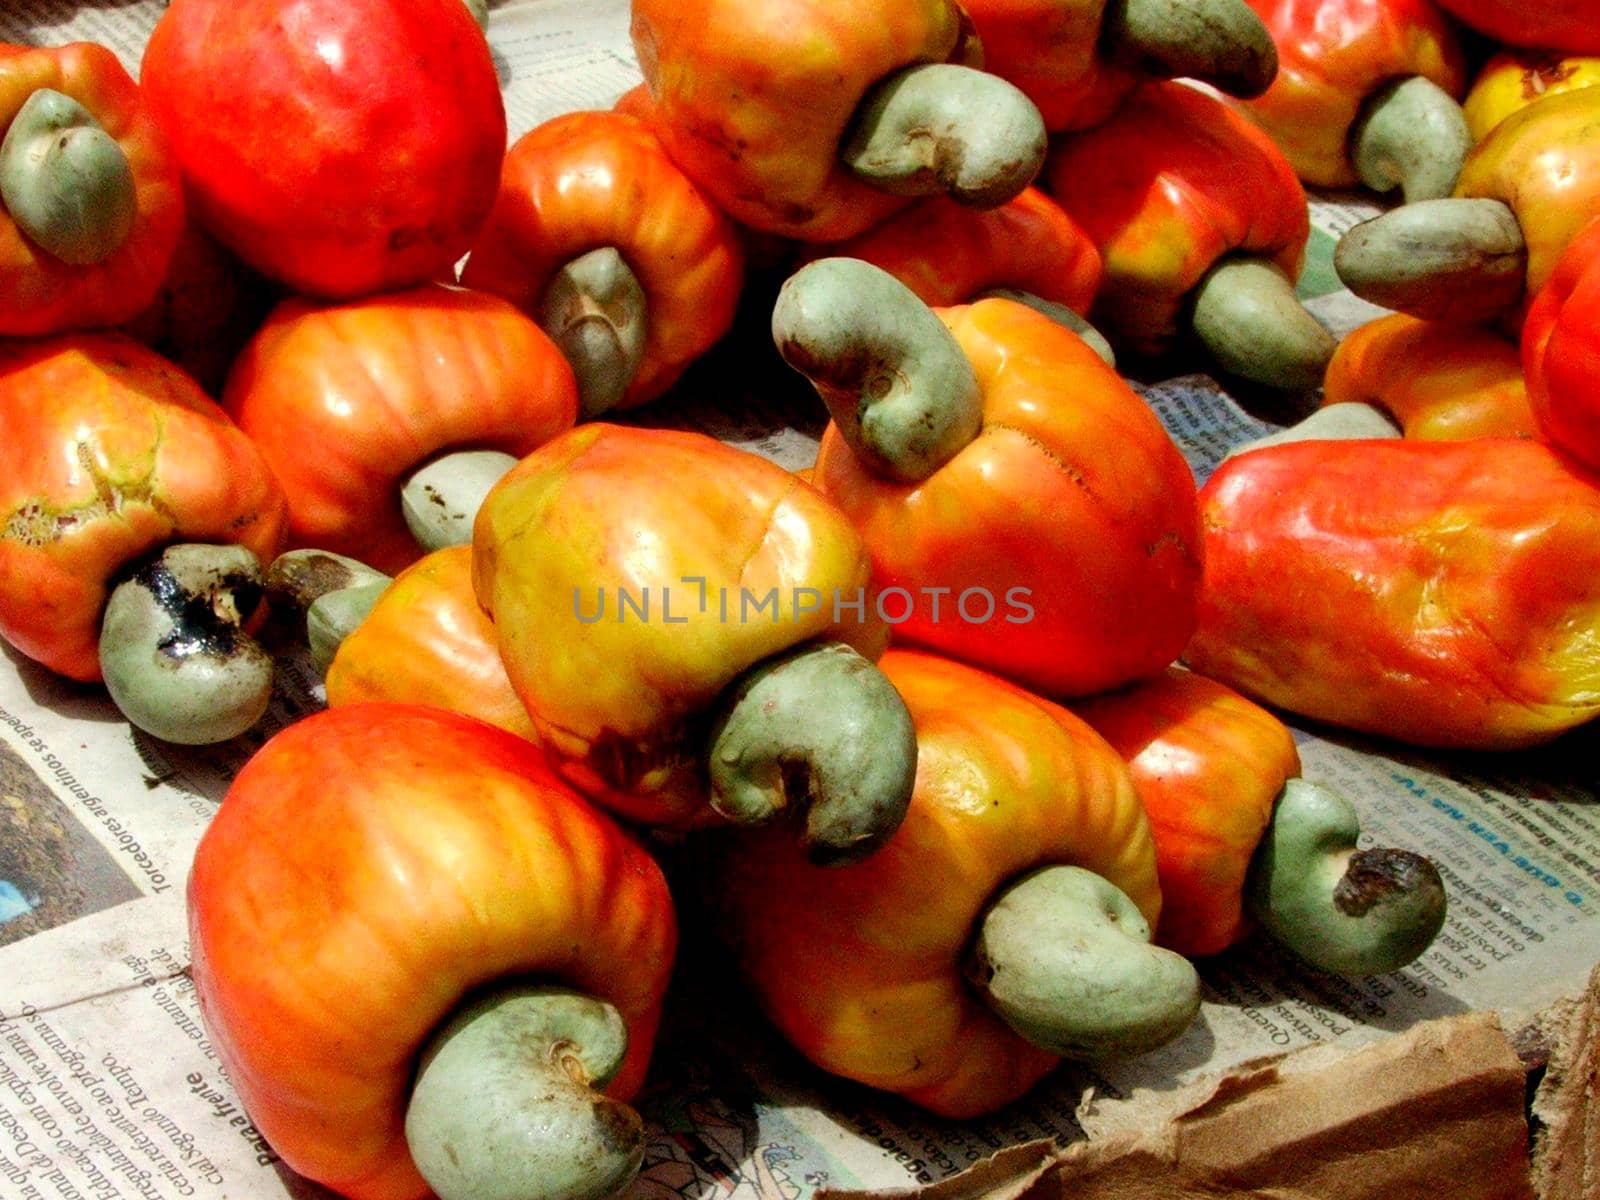 salvador, bahia / brazil - november 22, 2013: Cashew nuts are seen in cashew trees in plantation in the city of Salvador.